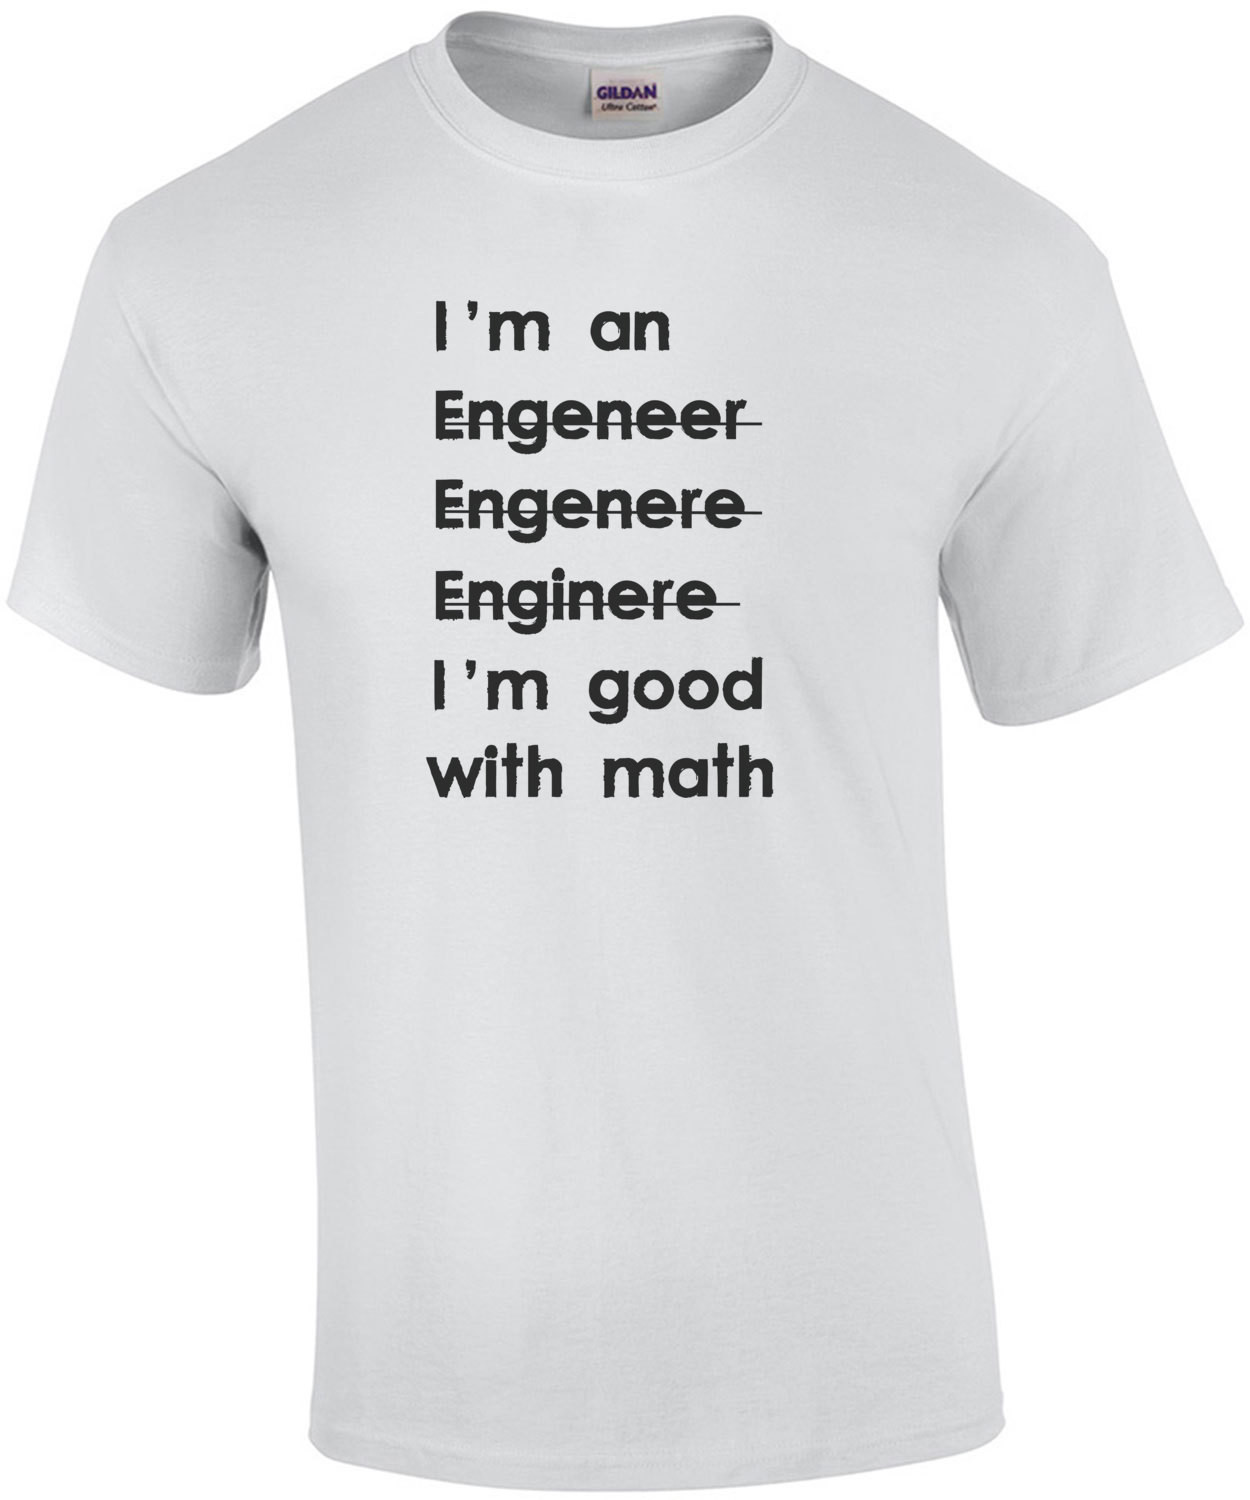 I'm an engineer I'm good with math - Funny Engineer T-shirt